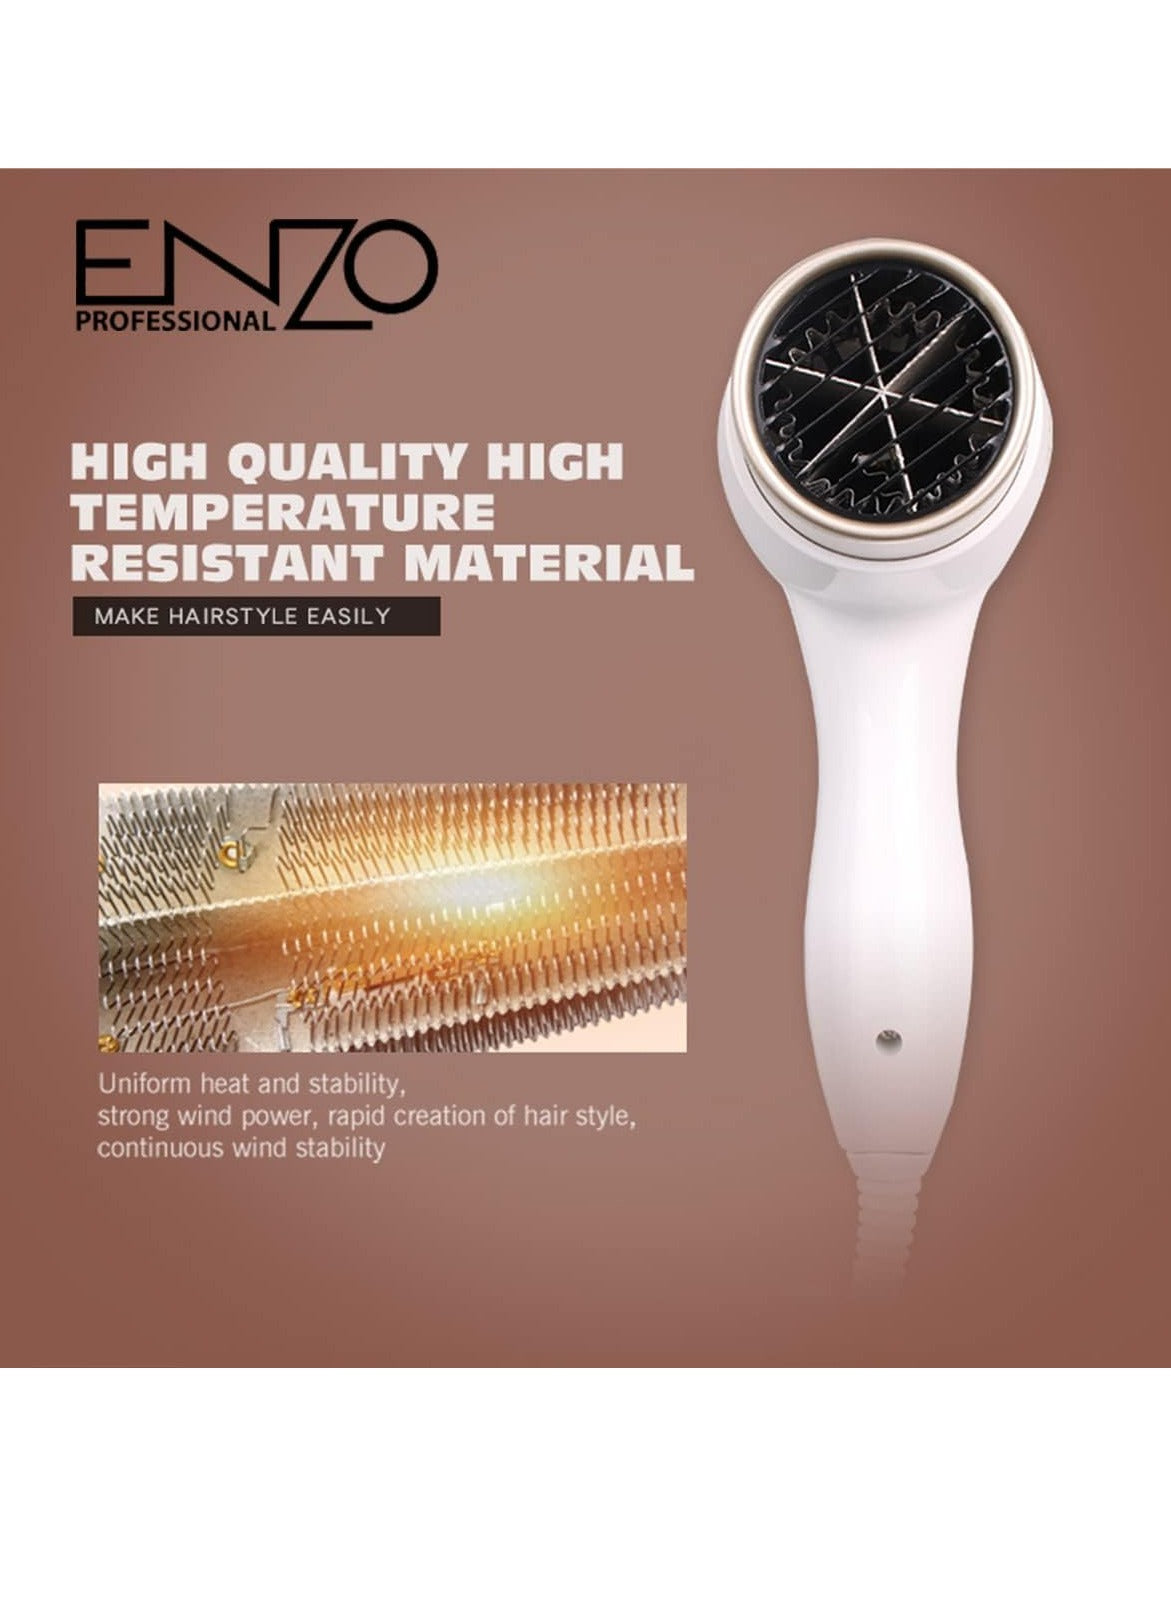 ENZO Professional Hair Dryer - 3000 Watts, Smooth Even Airflow, Removable Air Inlet Grill, Wind Power Regulating Switch, Temperature Control Switch, Overheating Protection Device EN-6622